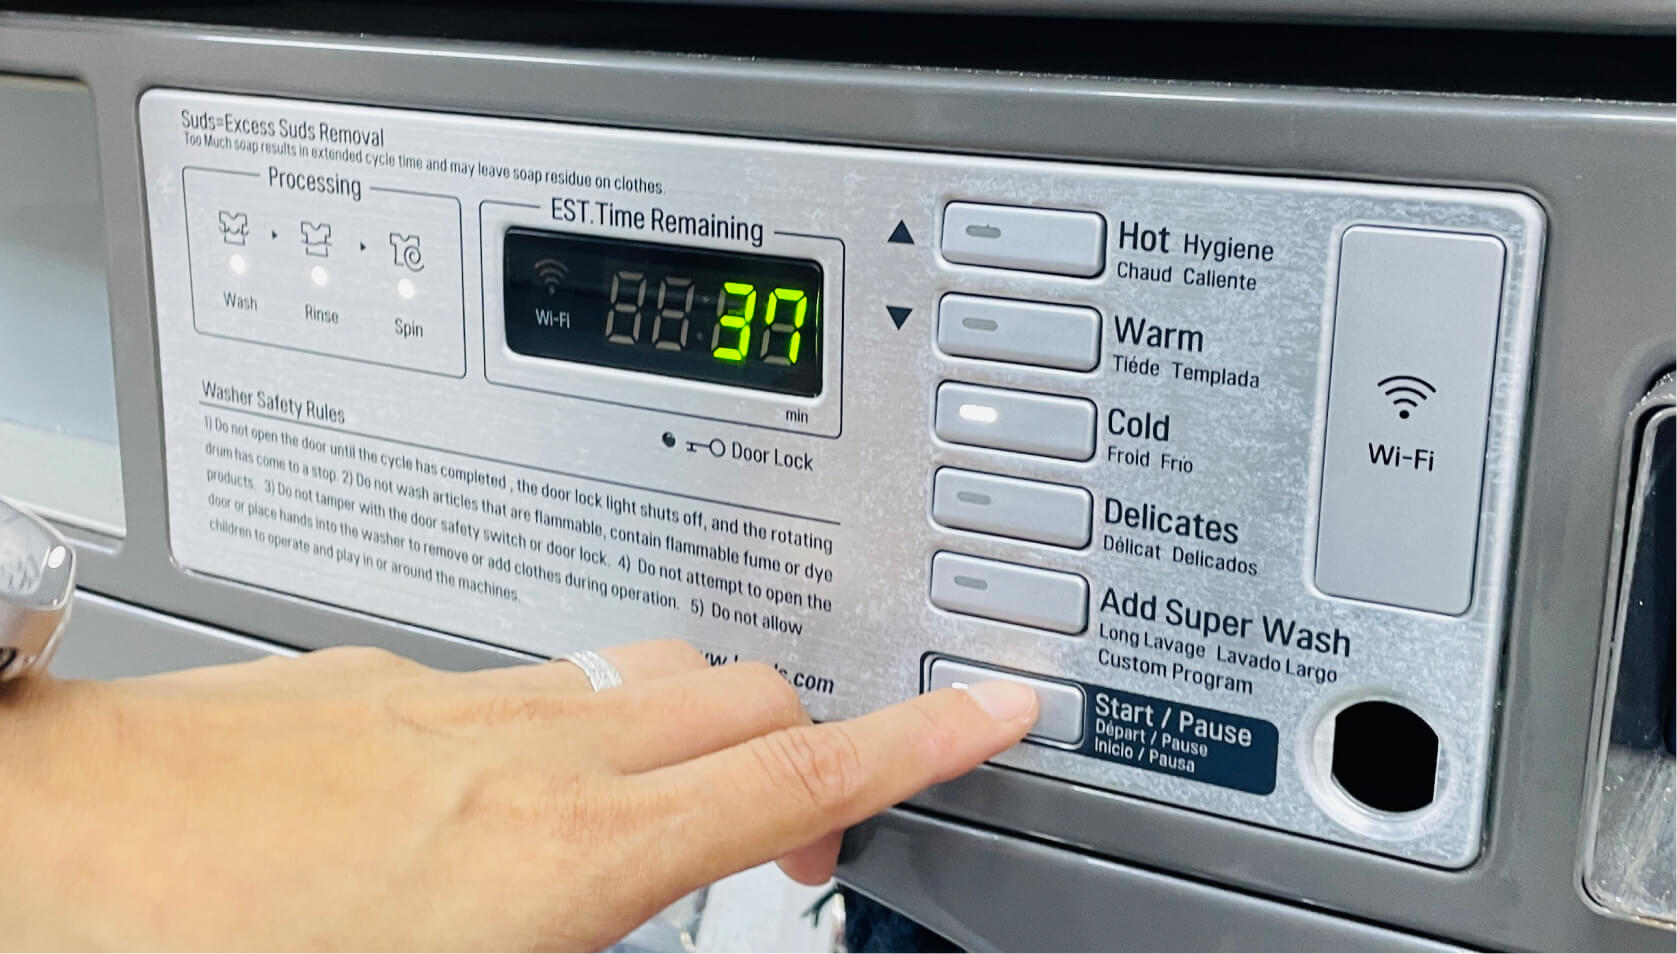 Cleanpro customer pressing the start button on LG washer